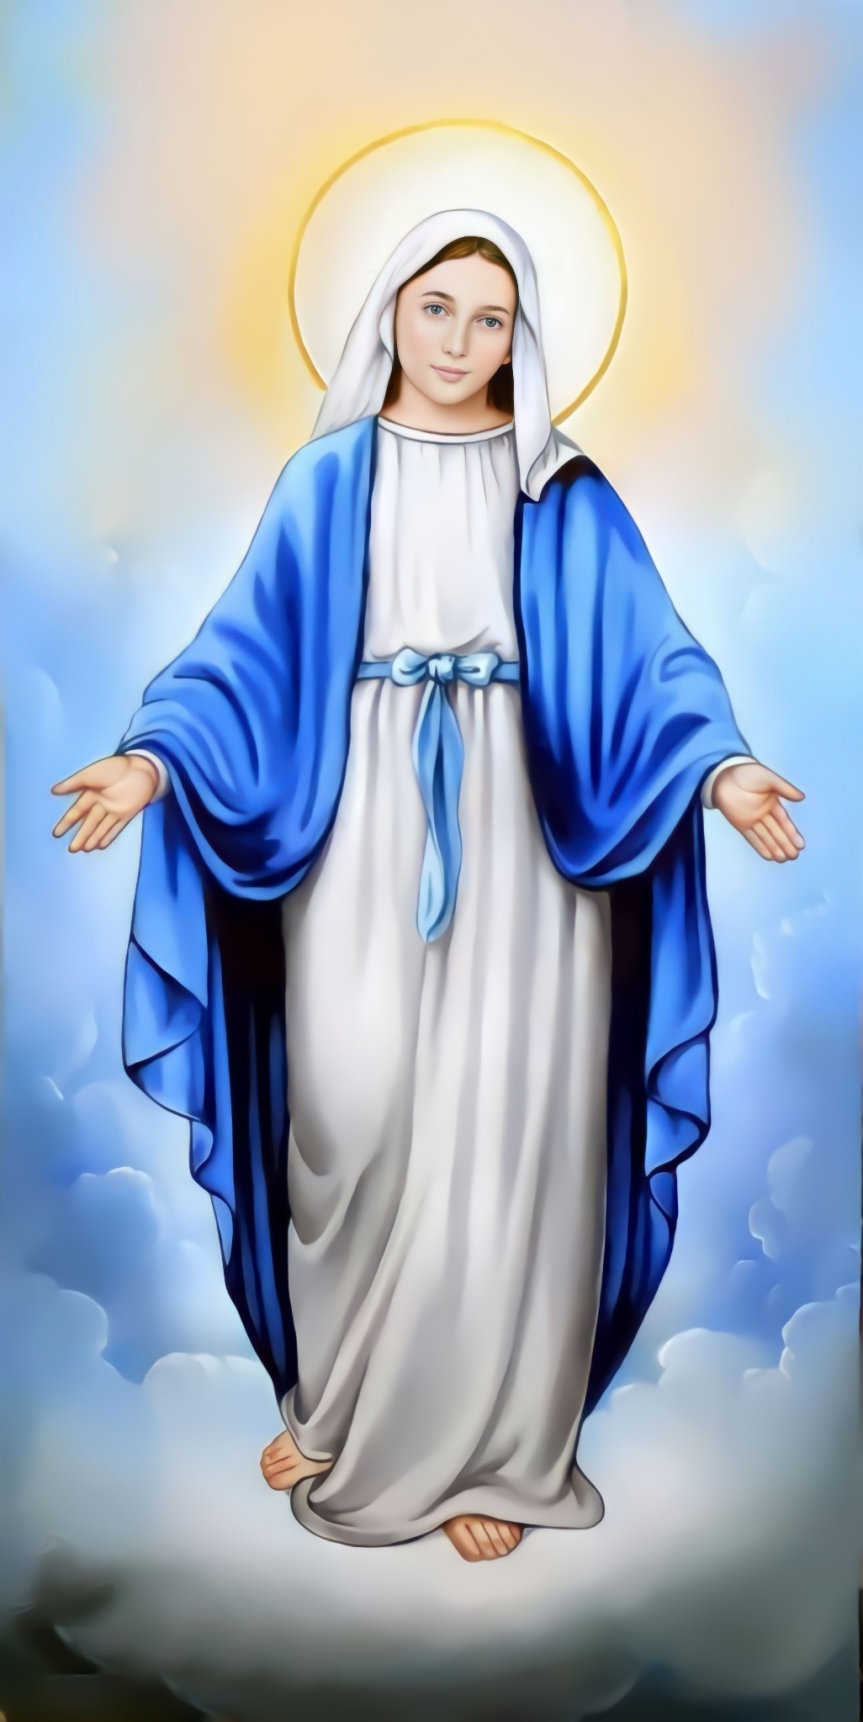 SOLEMNITY OF THE IMMACULATE CONCEPTION